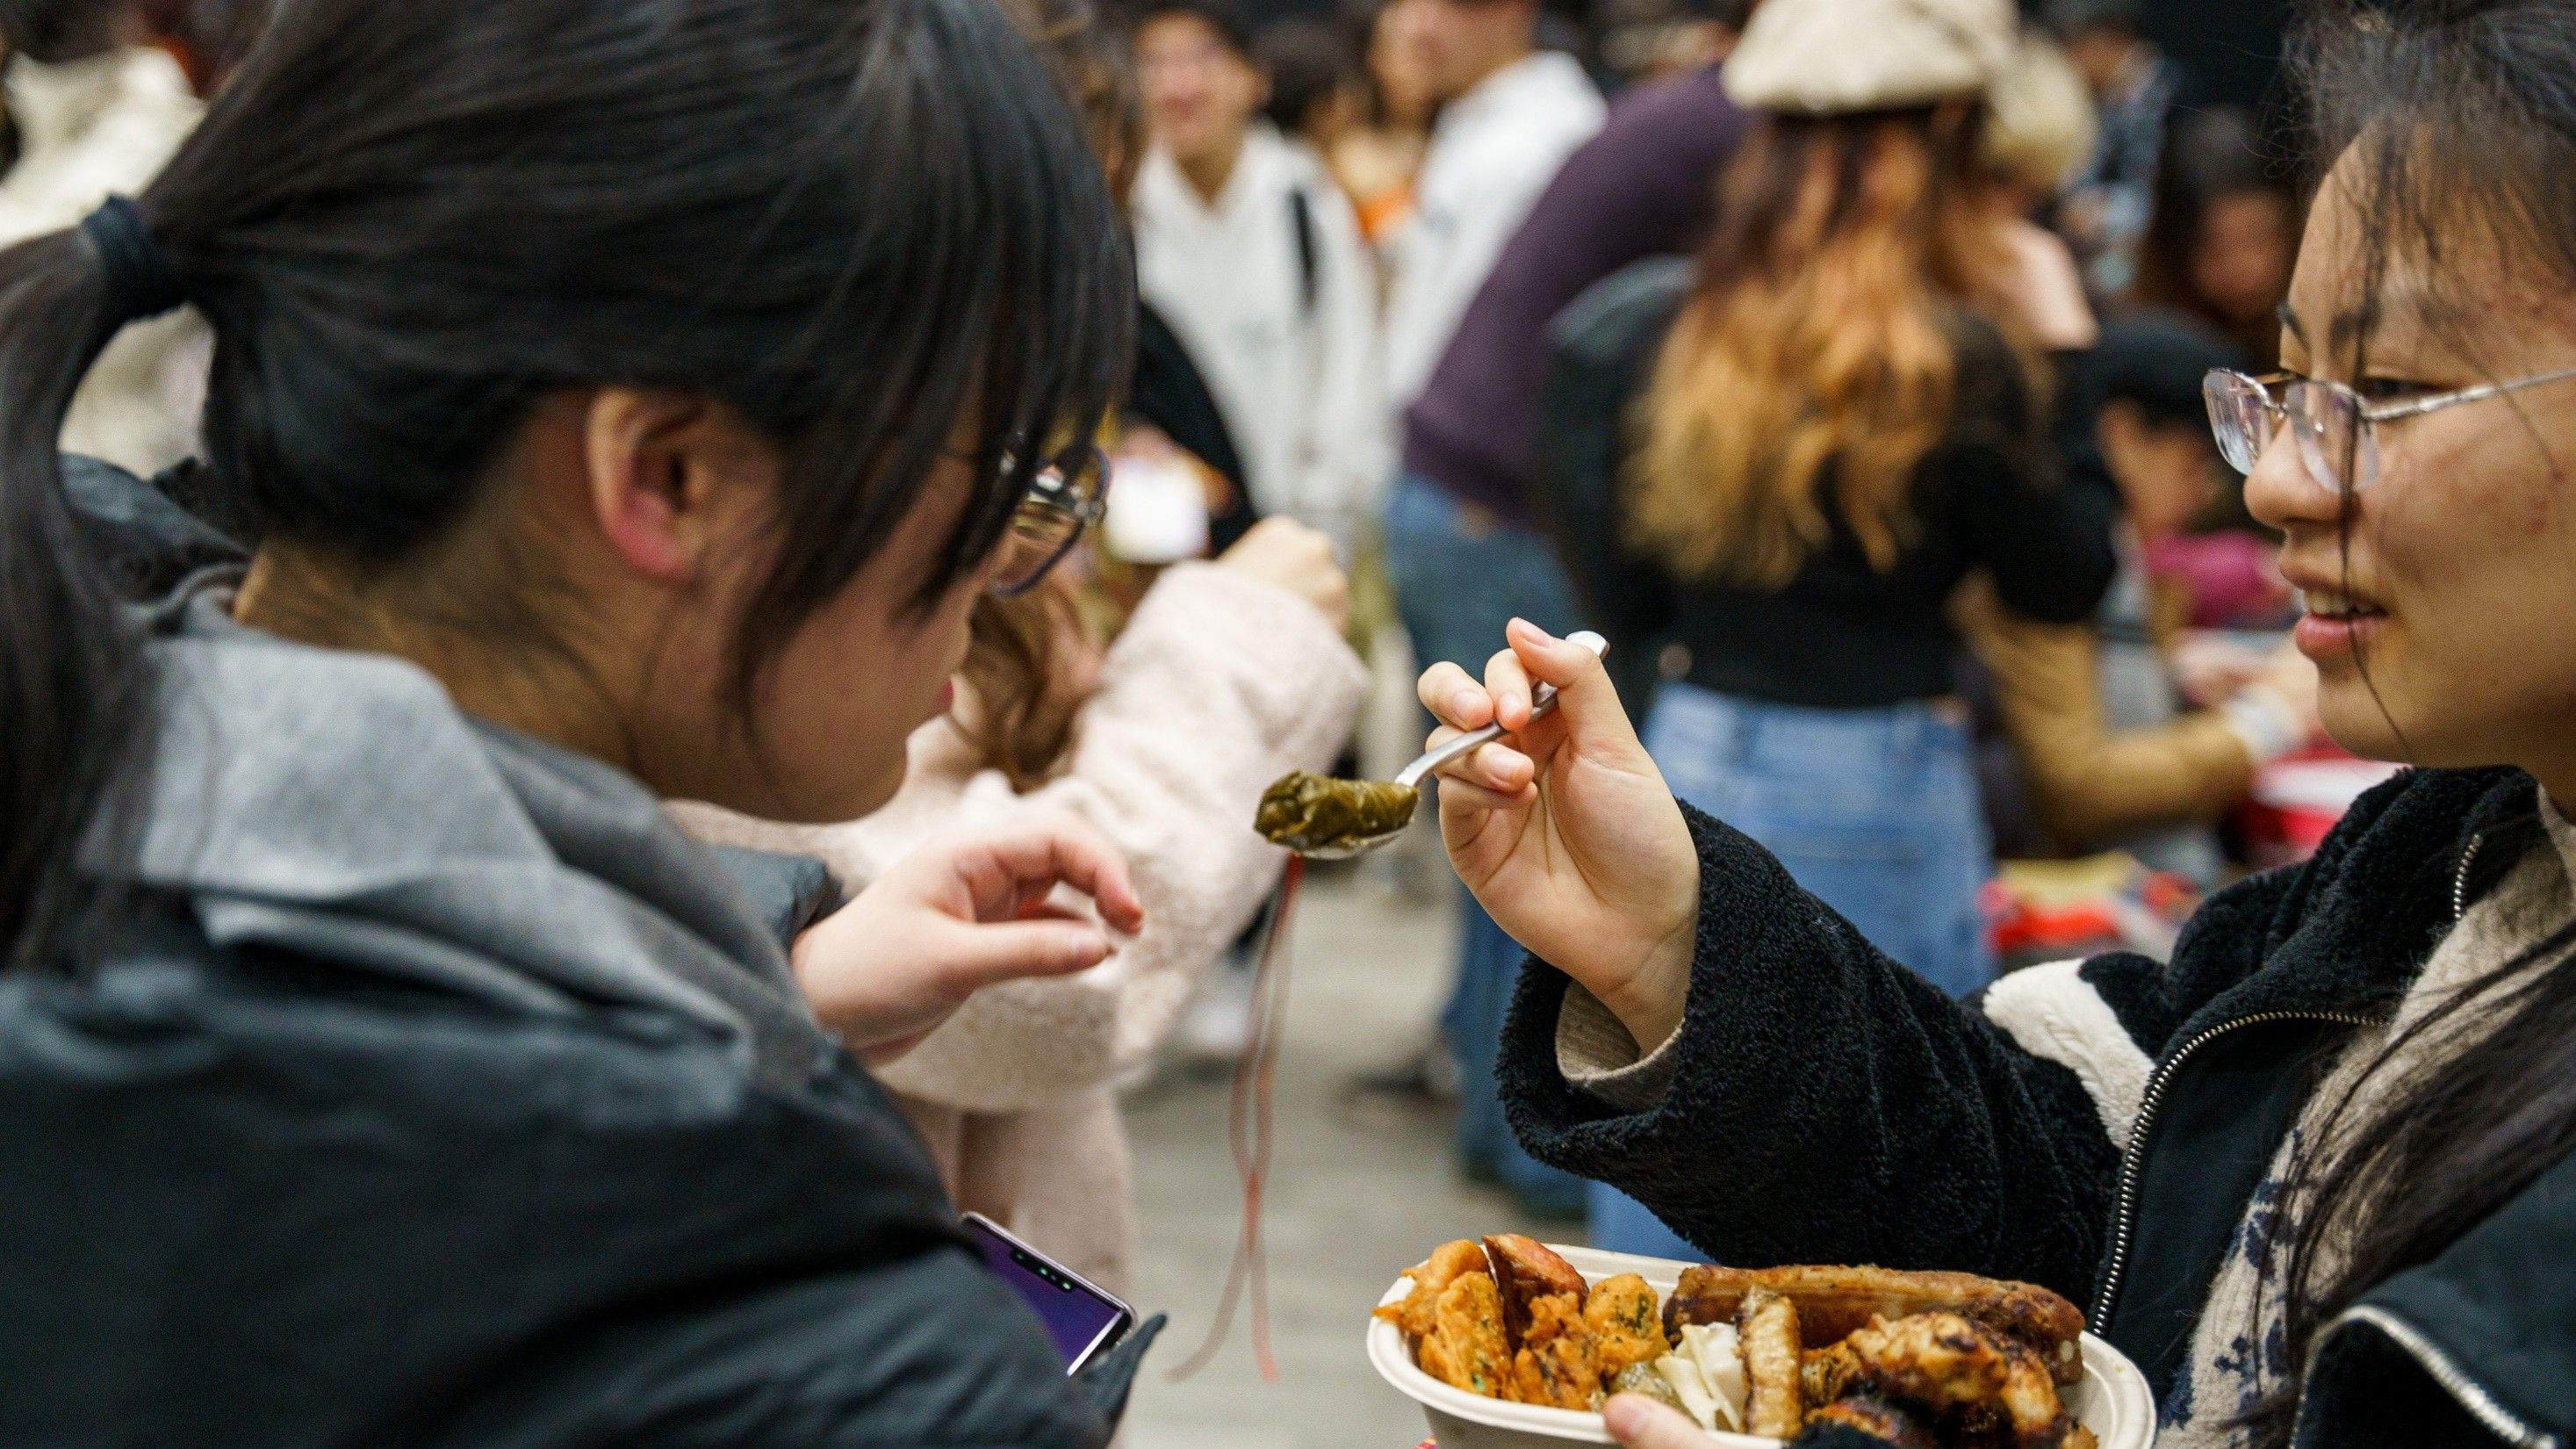 Students trying a variety of foods from around the globe at World Fest